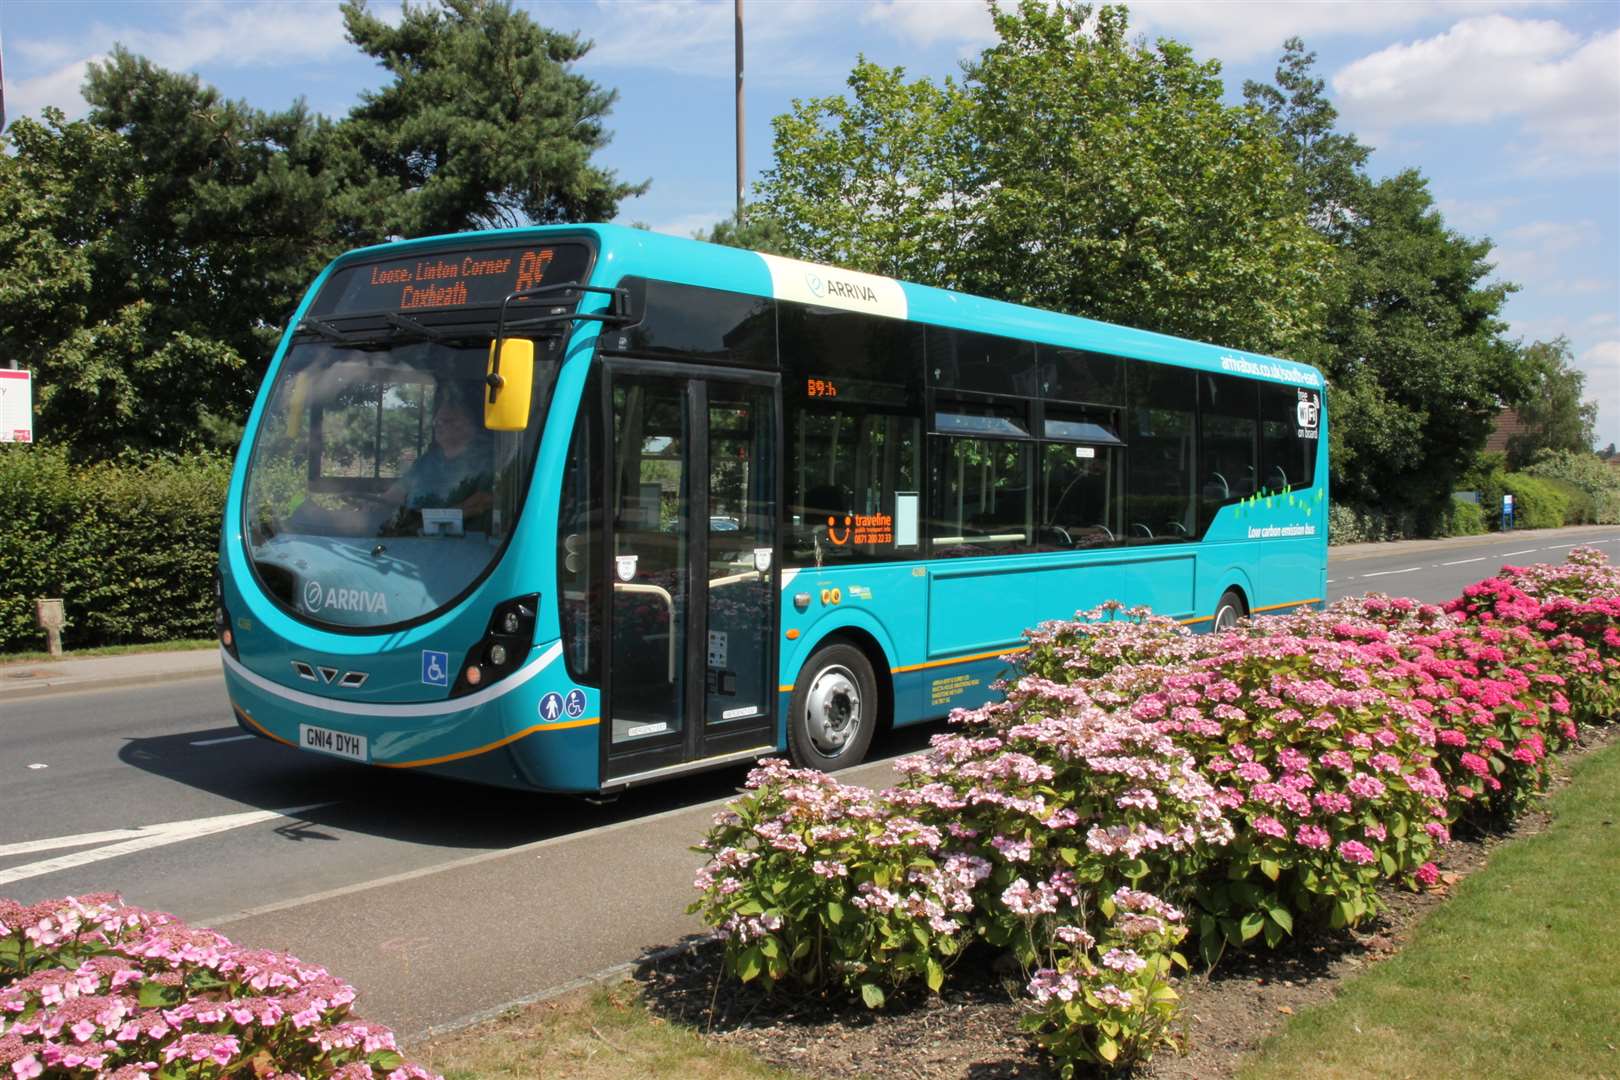 Buses into Maidstone and Aylesford were cancelled. Picture: Arriva